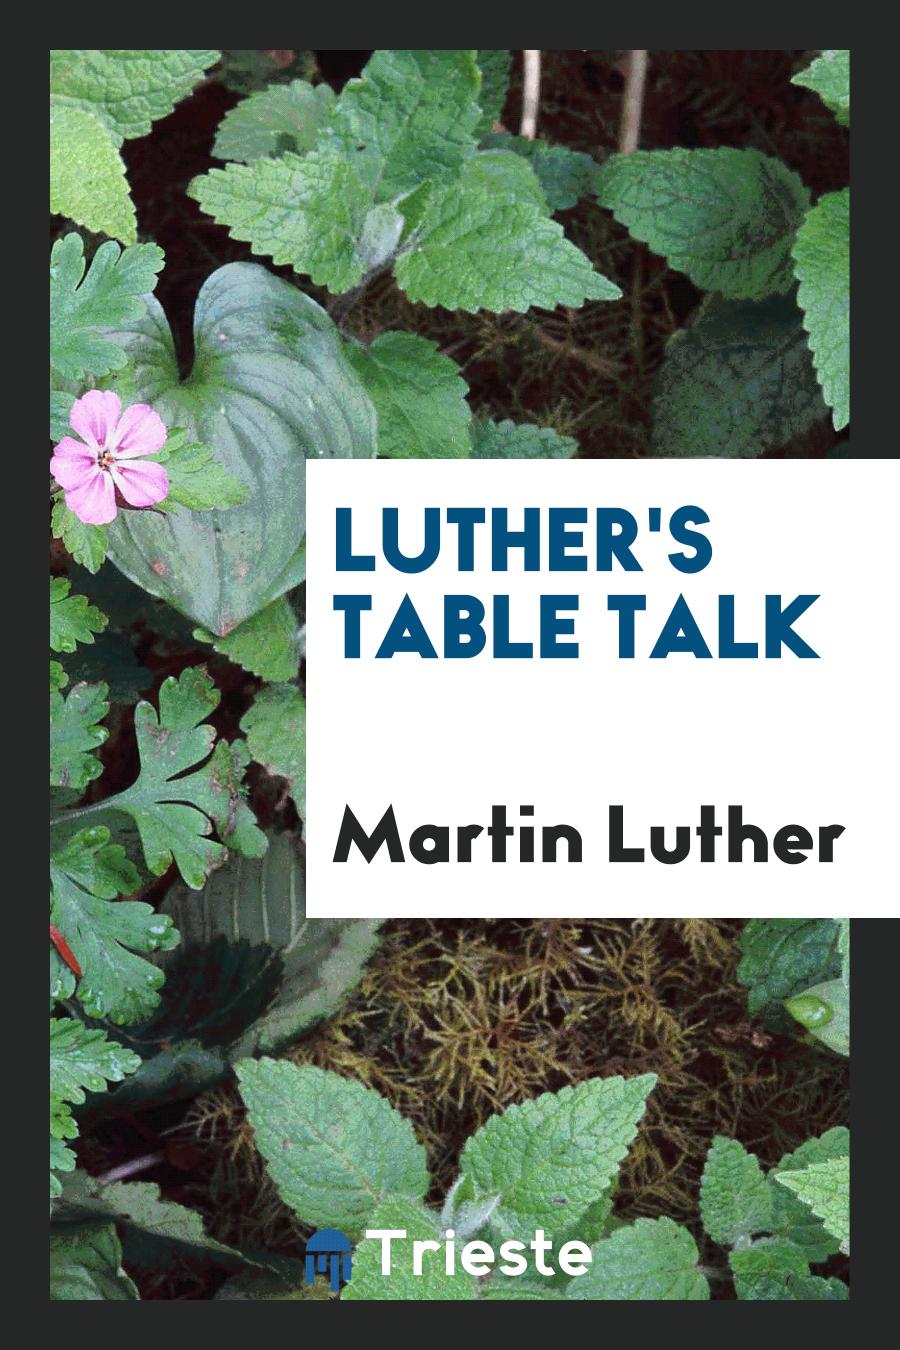 Luther's Table talk